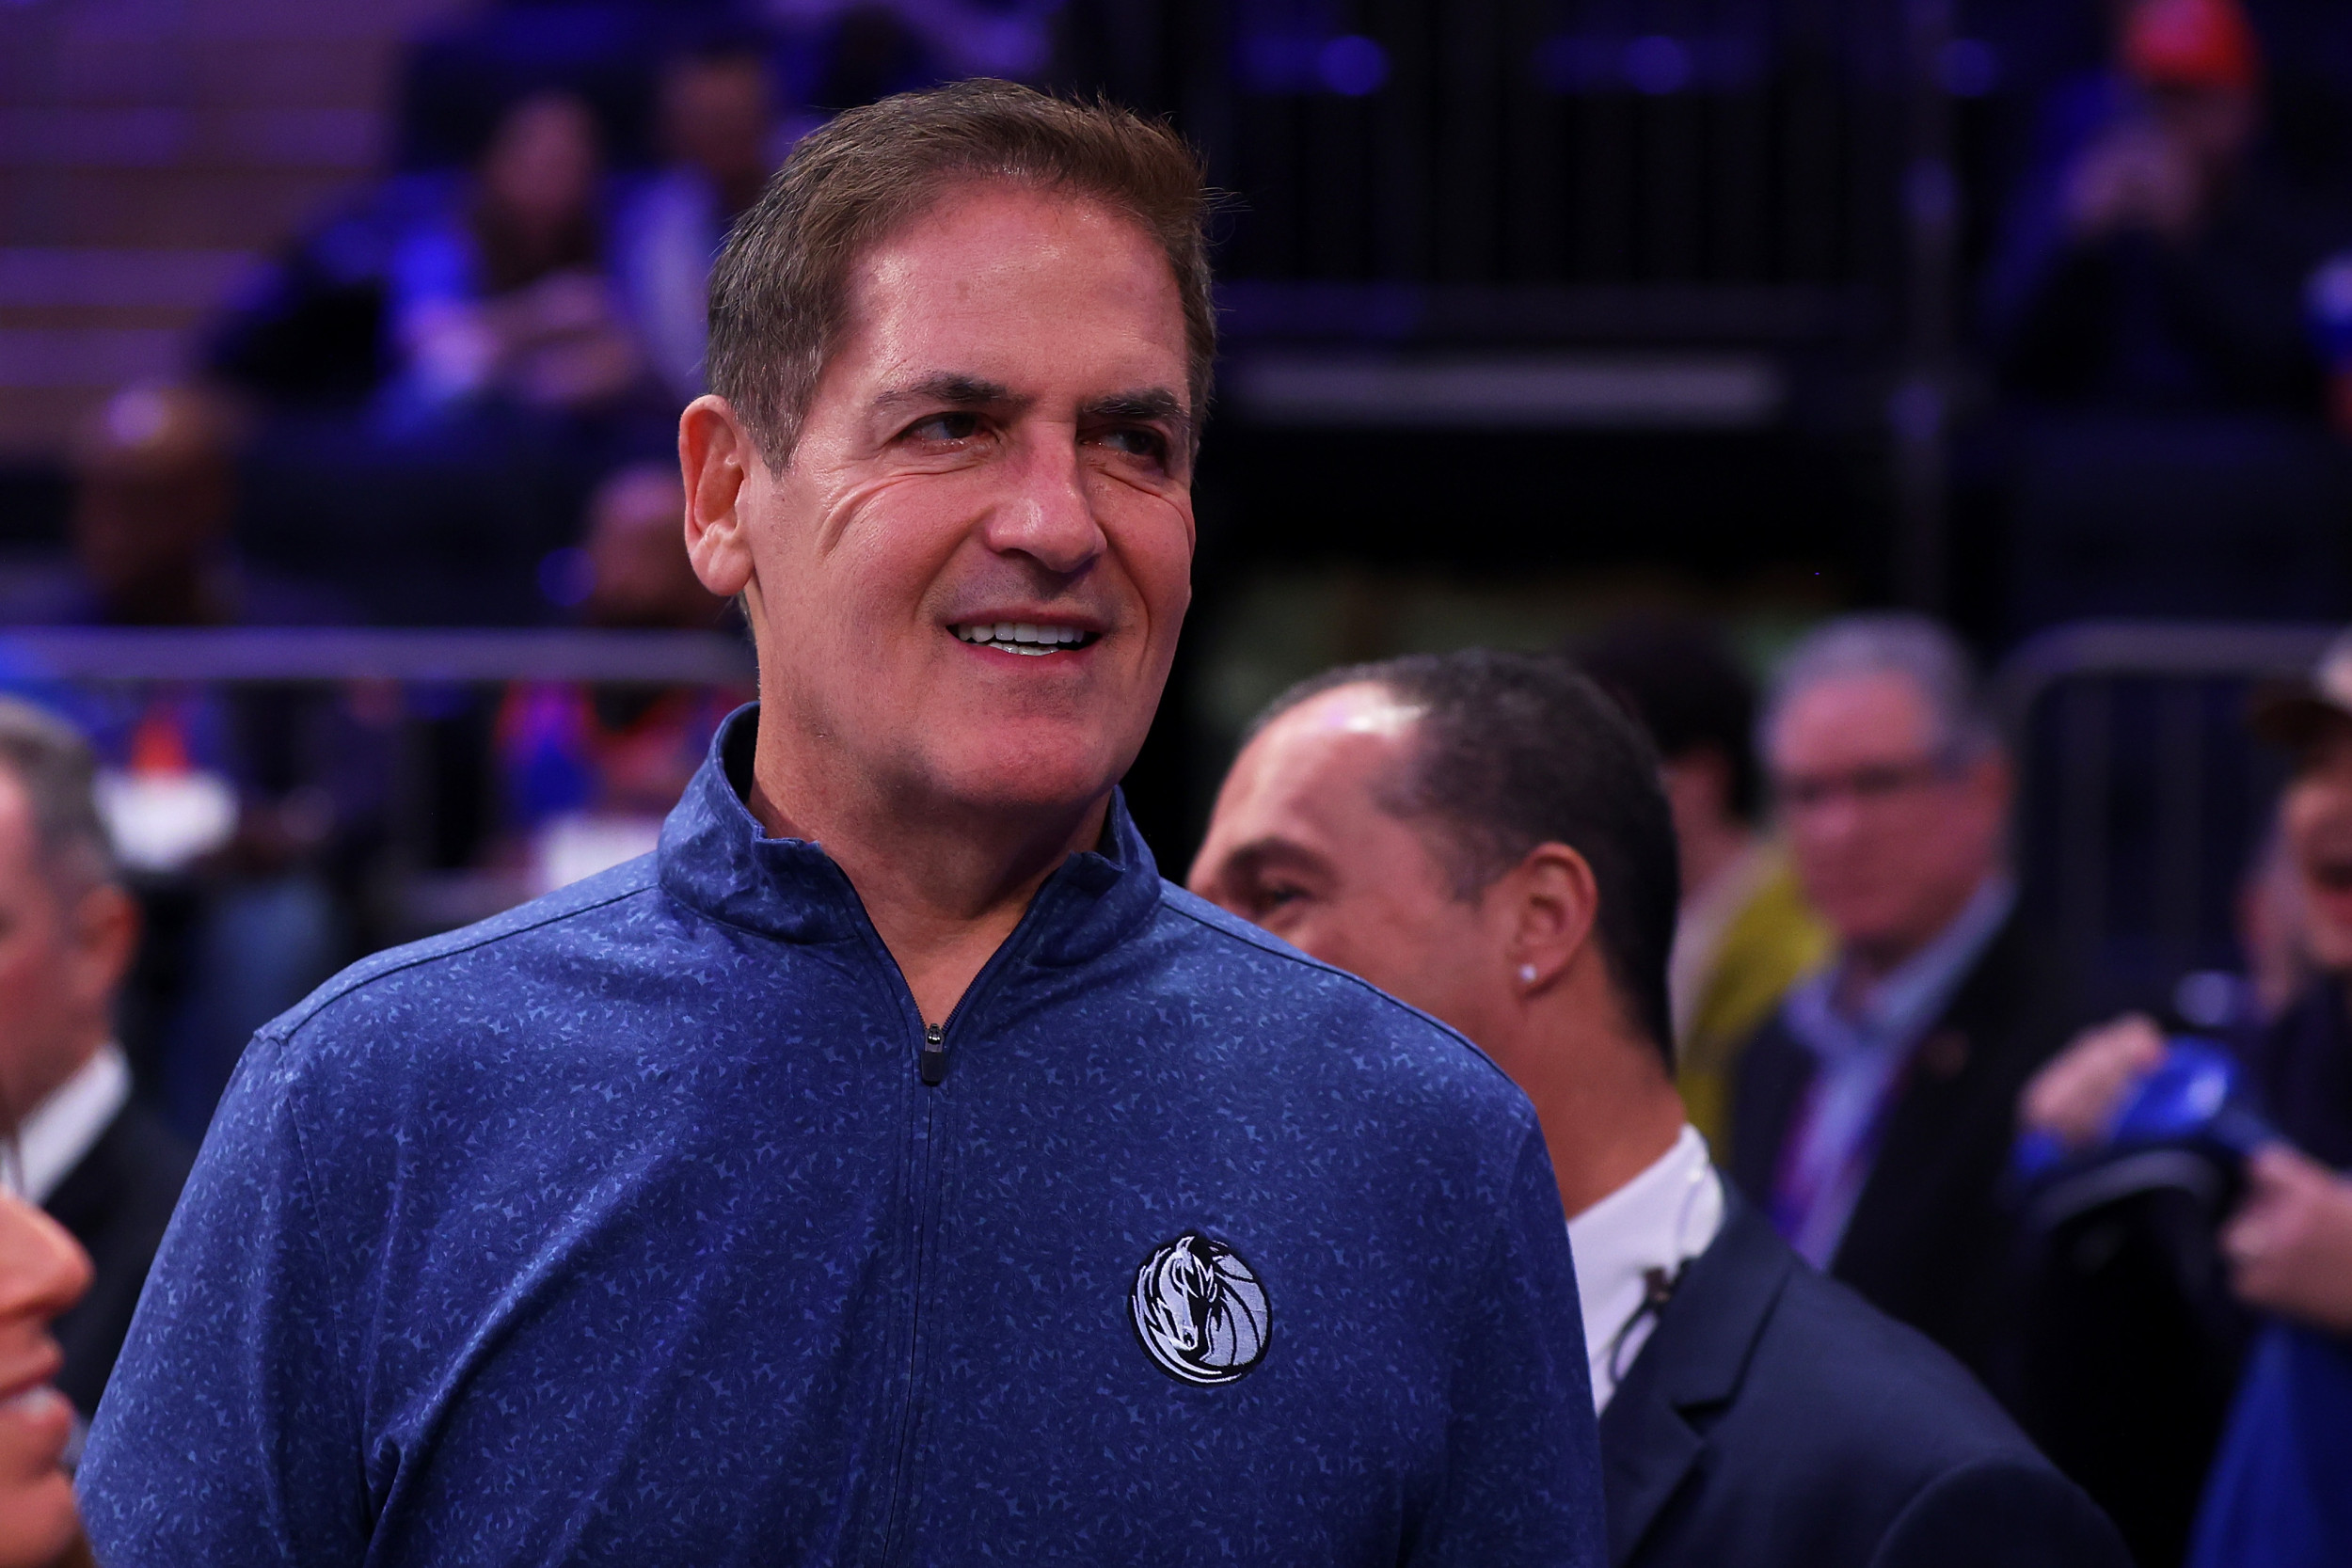 Mark Cuban says he plans to leave 'Shark Tank' after 16th season